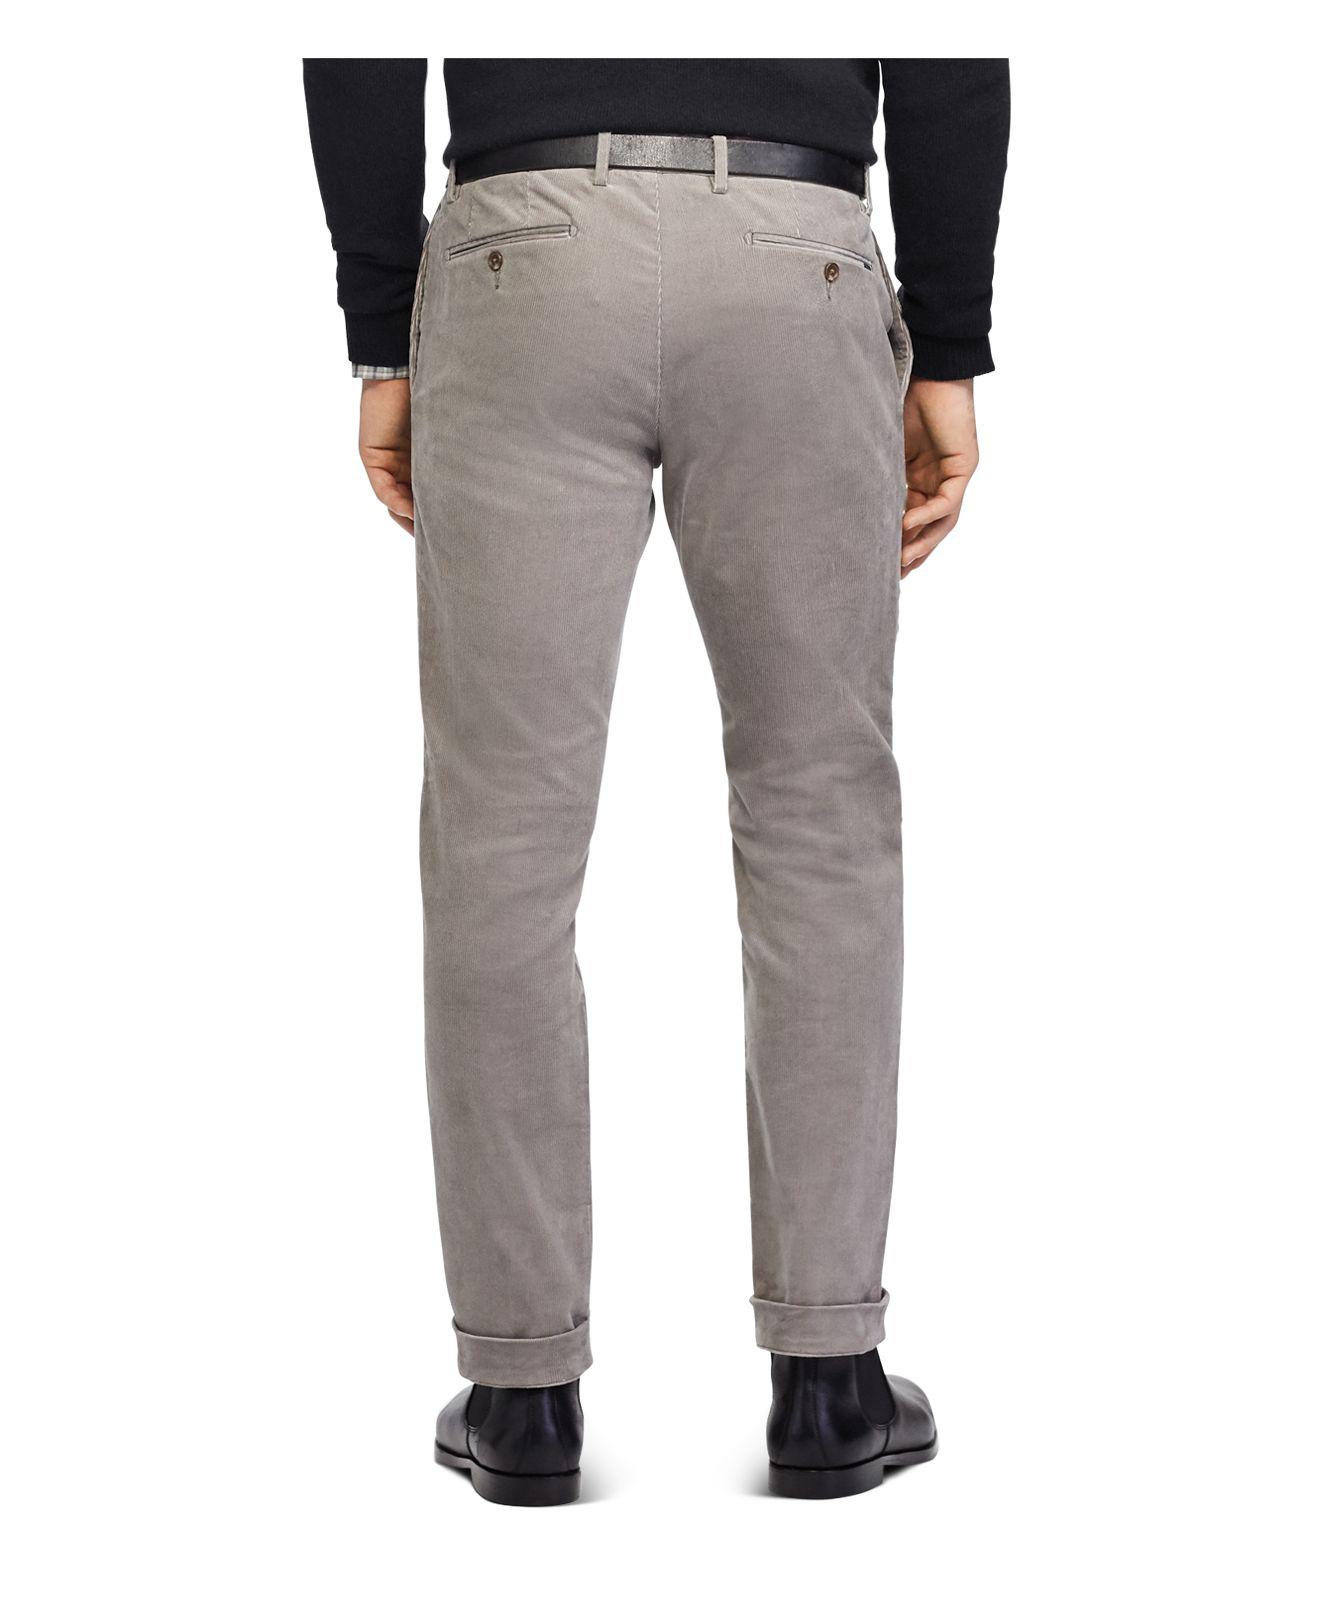 Polo Ralph Lauren Stretch Slim Fit Corduroy Pants in Gray for Men - Lyst